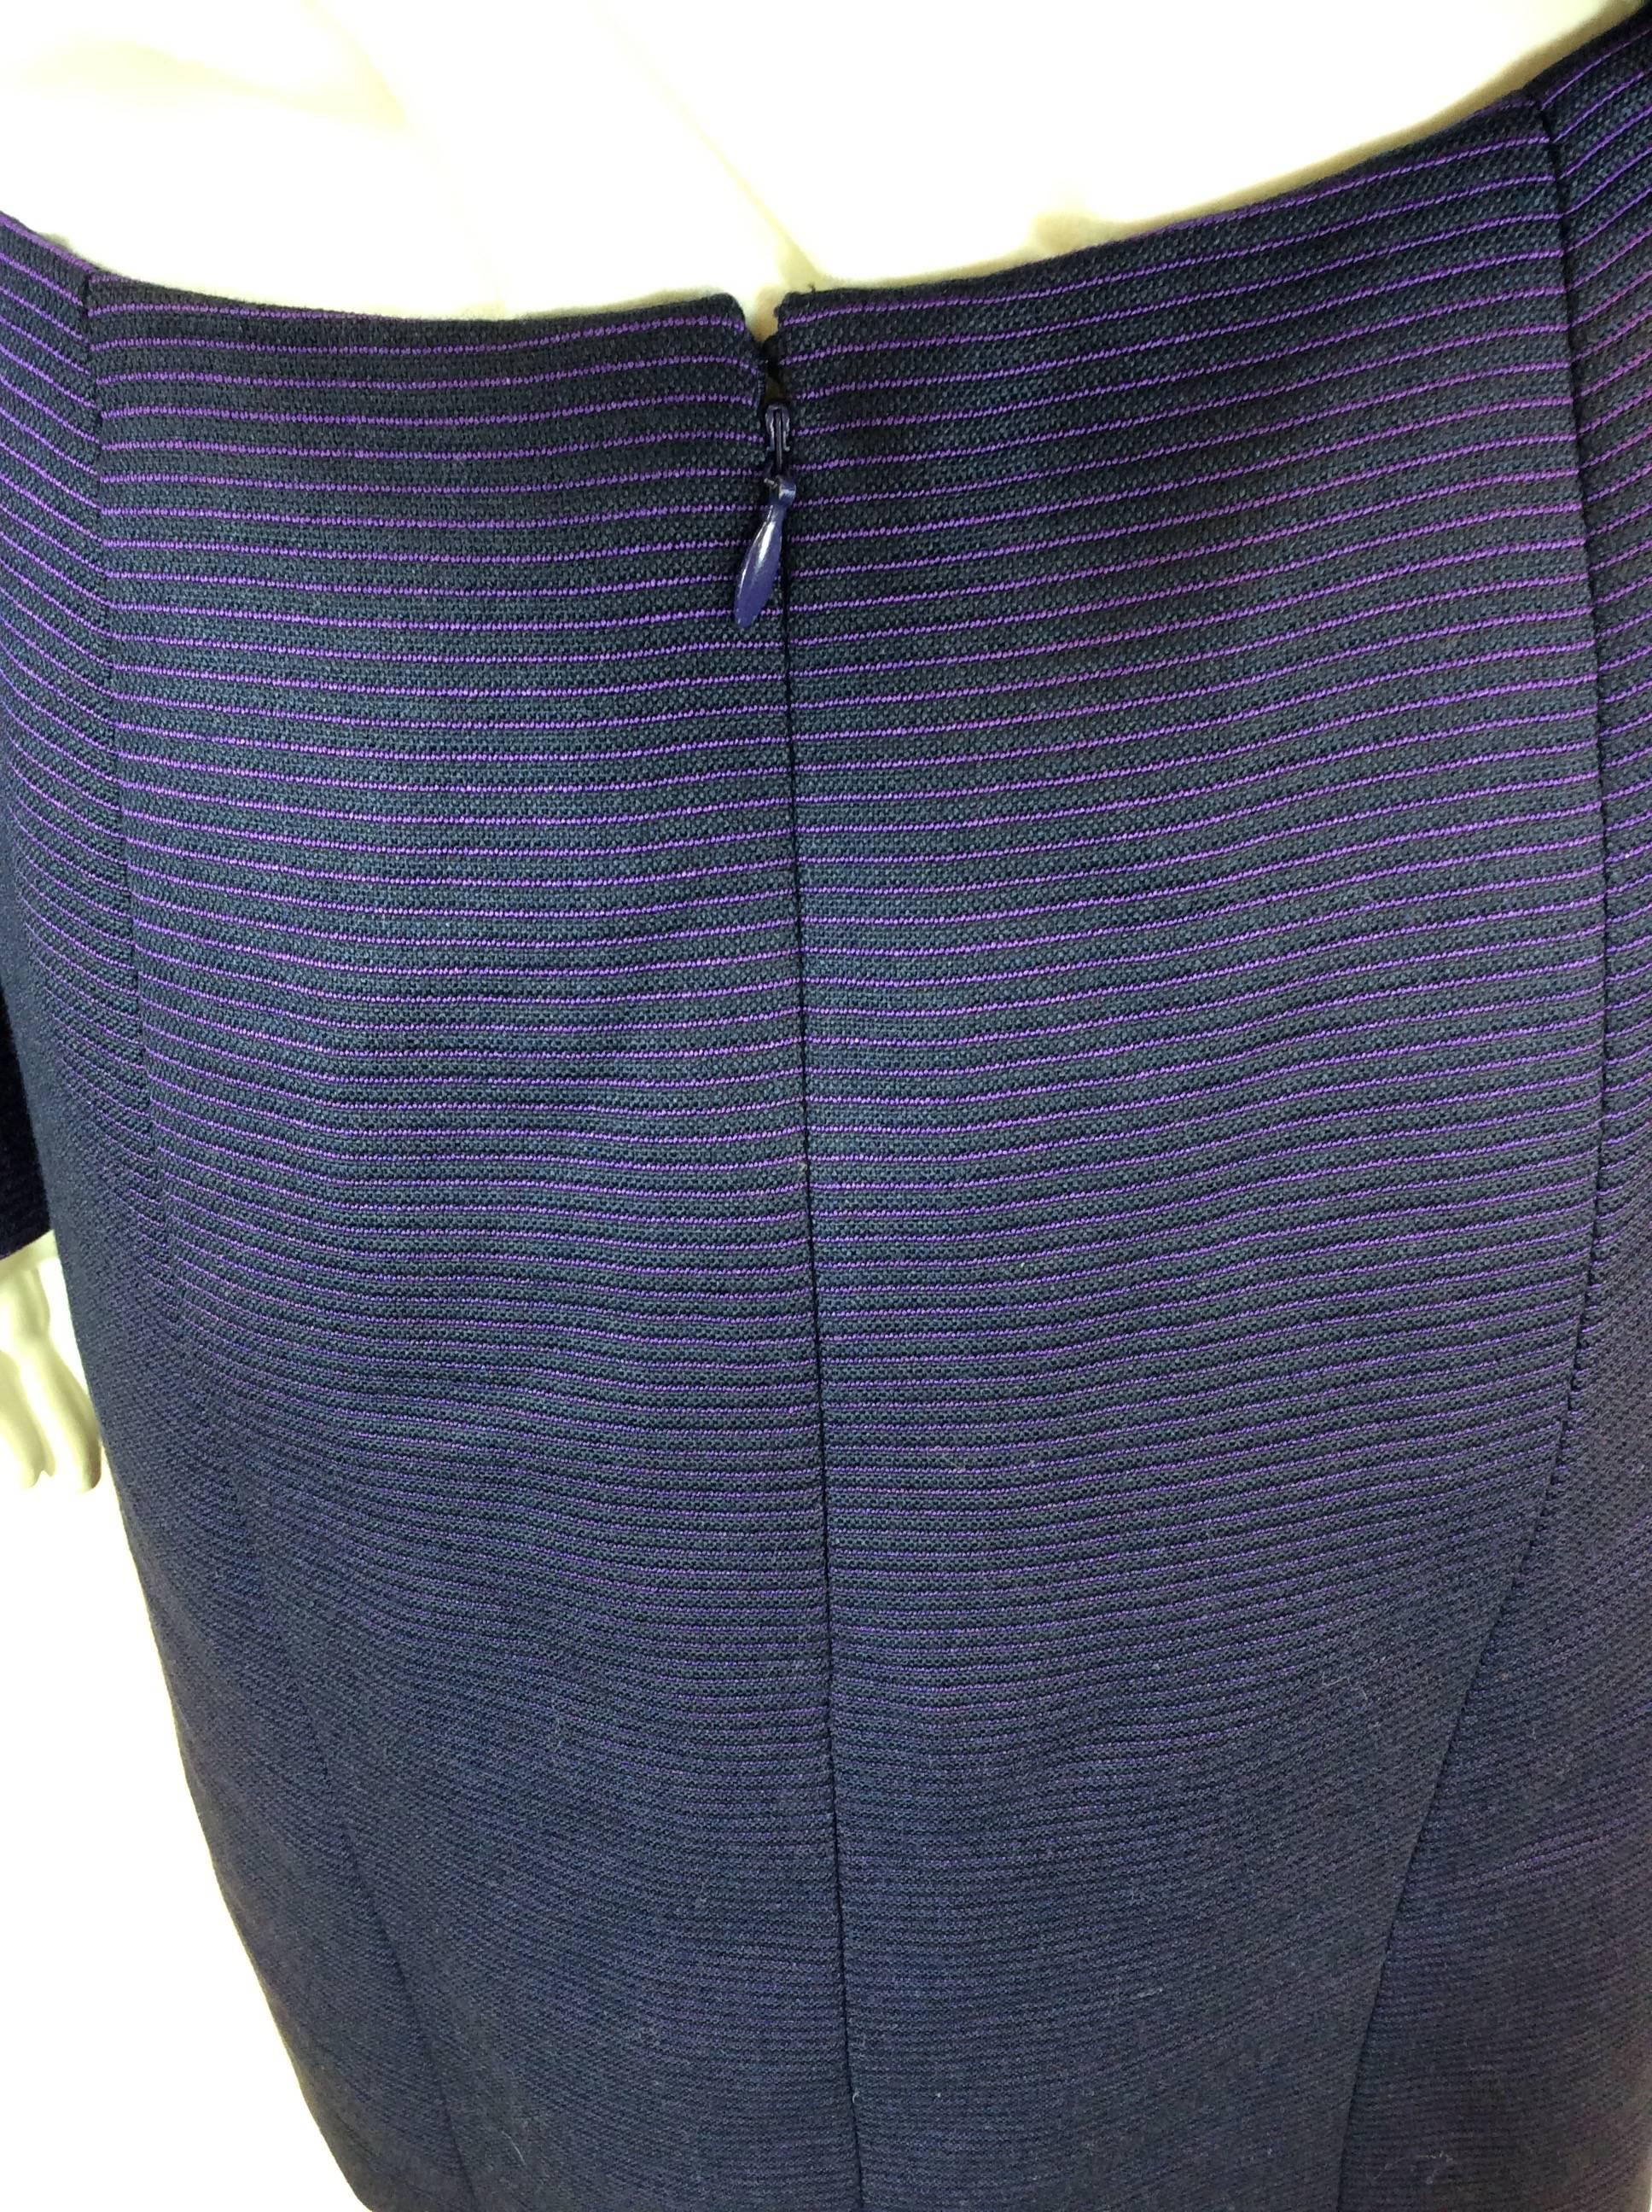 HOLIDAY FLASH SALE! 50% Off! Chanel Two Piece Purple Skirt Suit Set 2